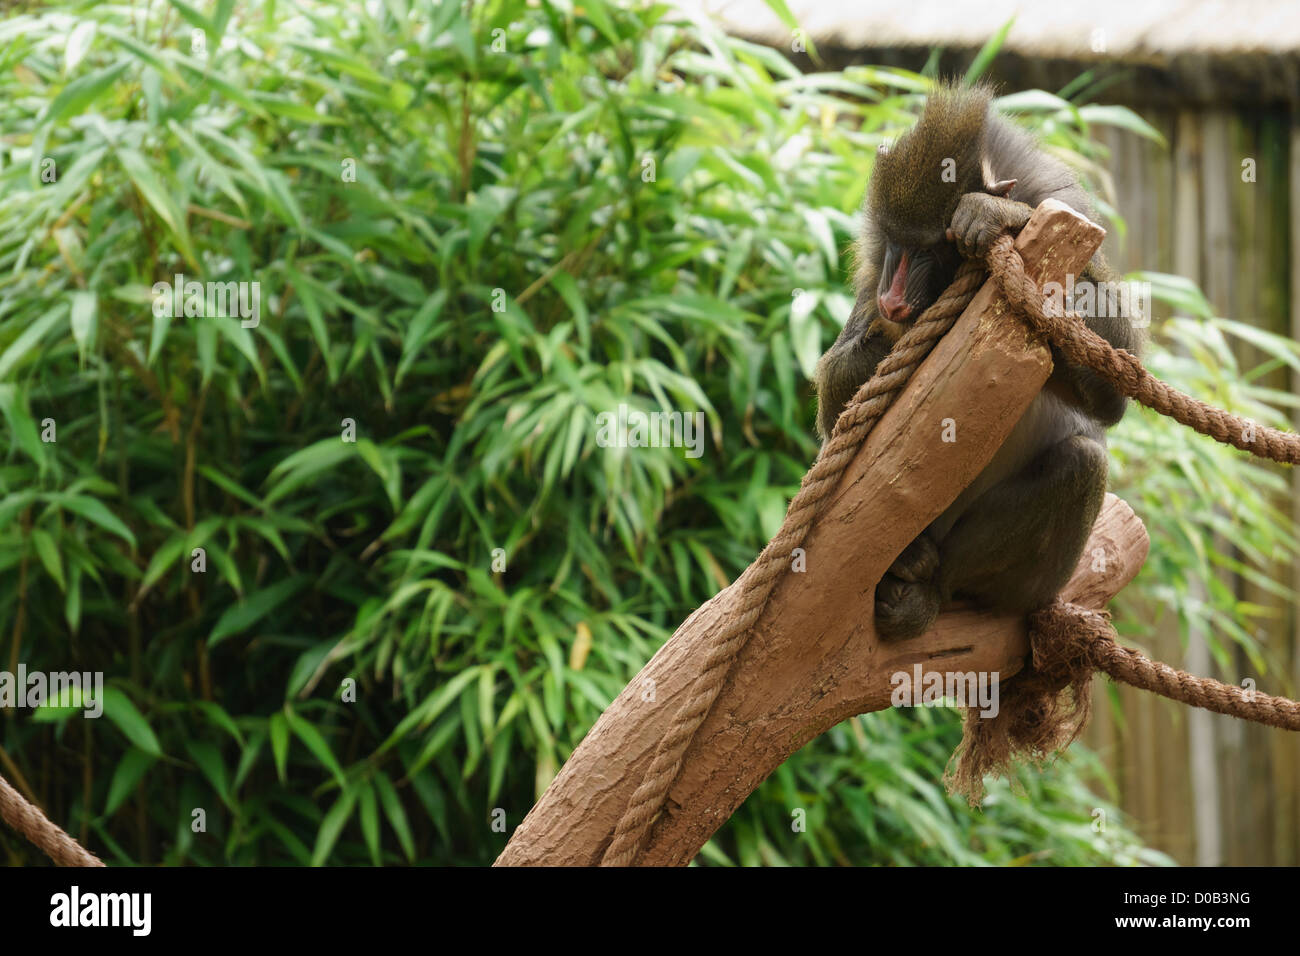 Hamadryas Baboon sleeping on a wooden branch at Lake District Animal Park. Stock Photo